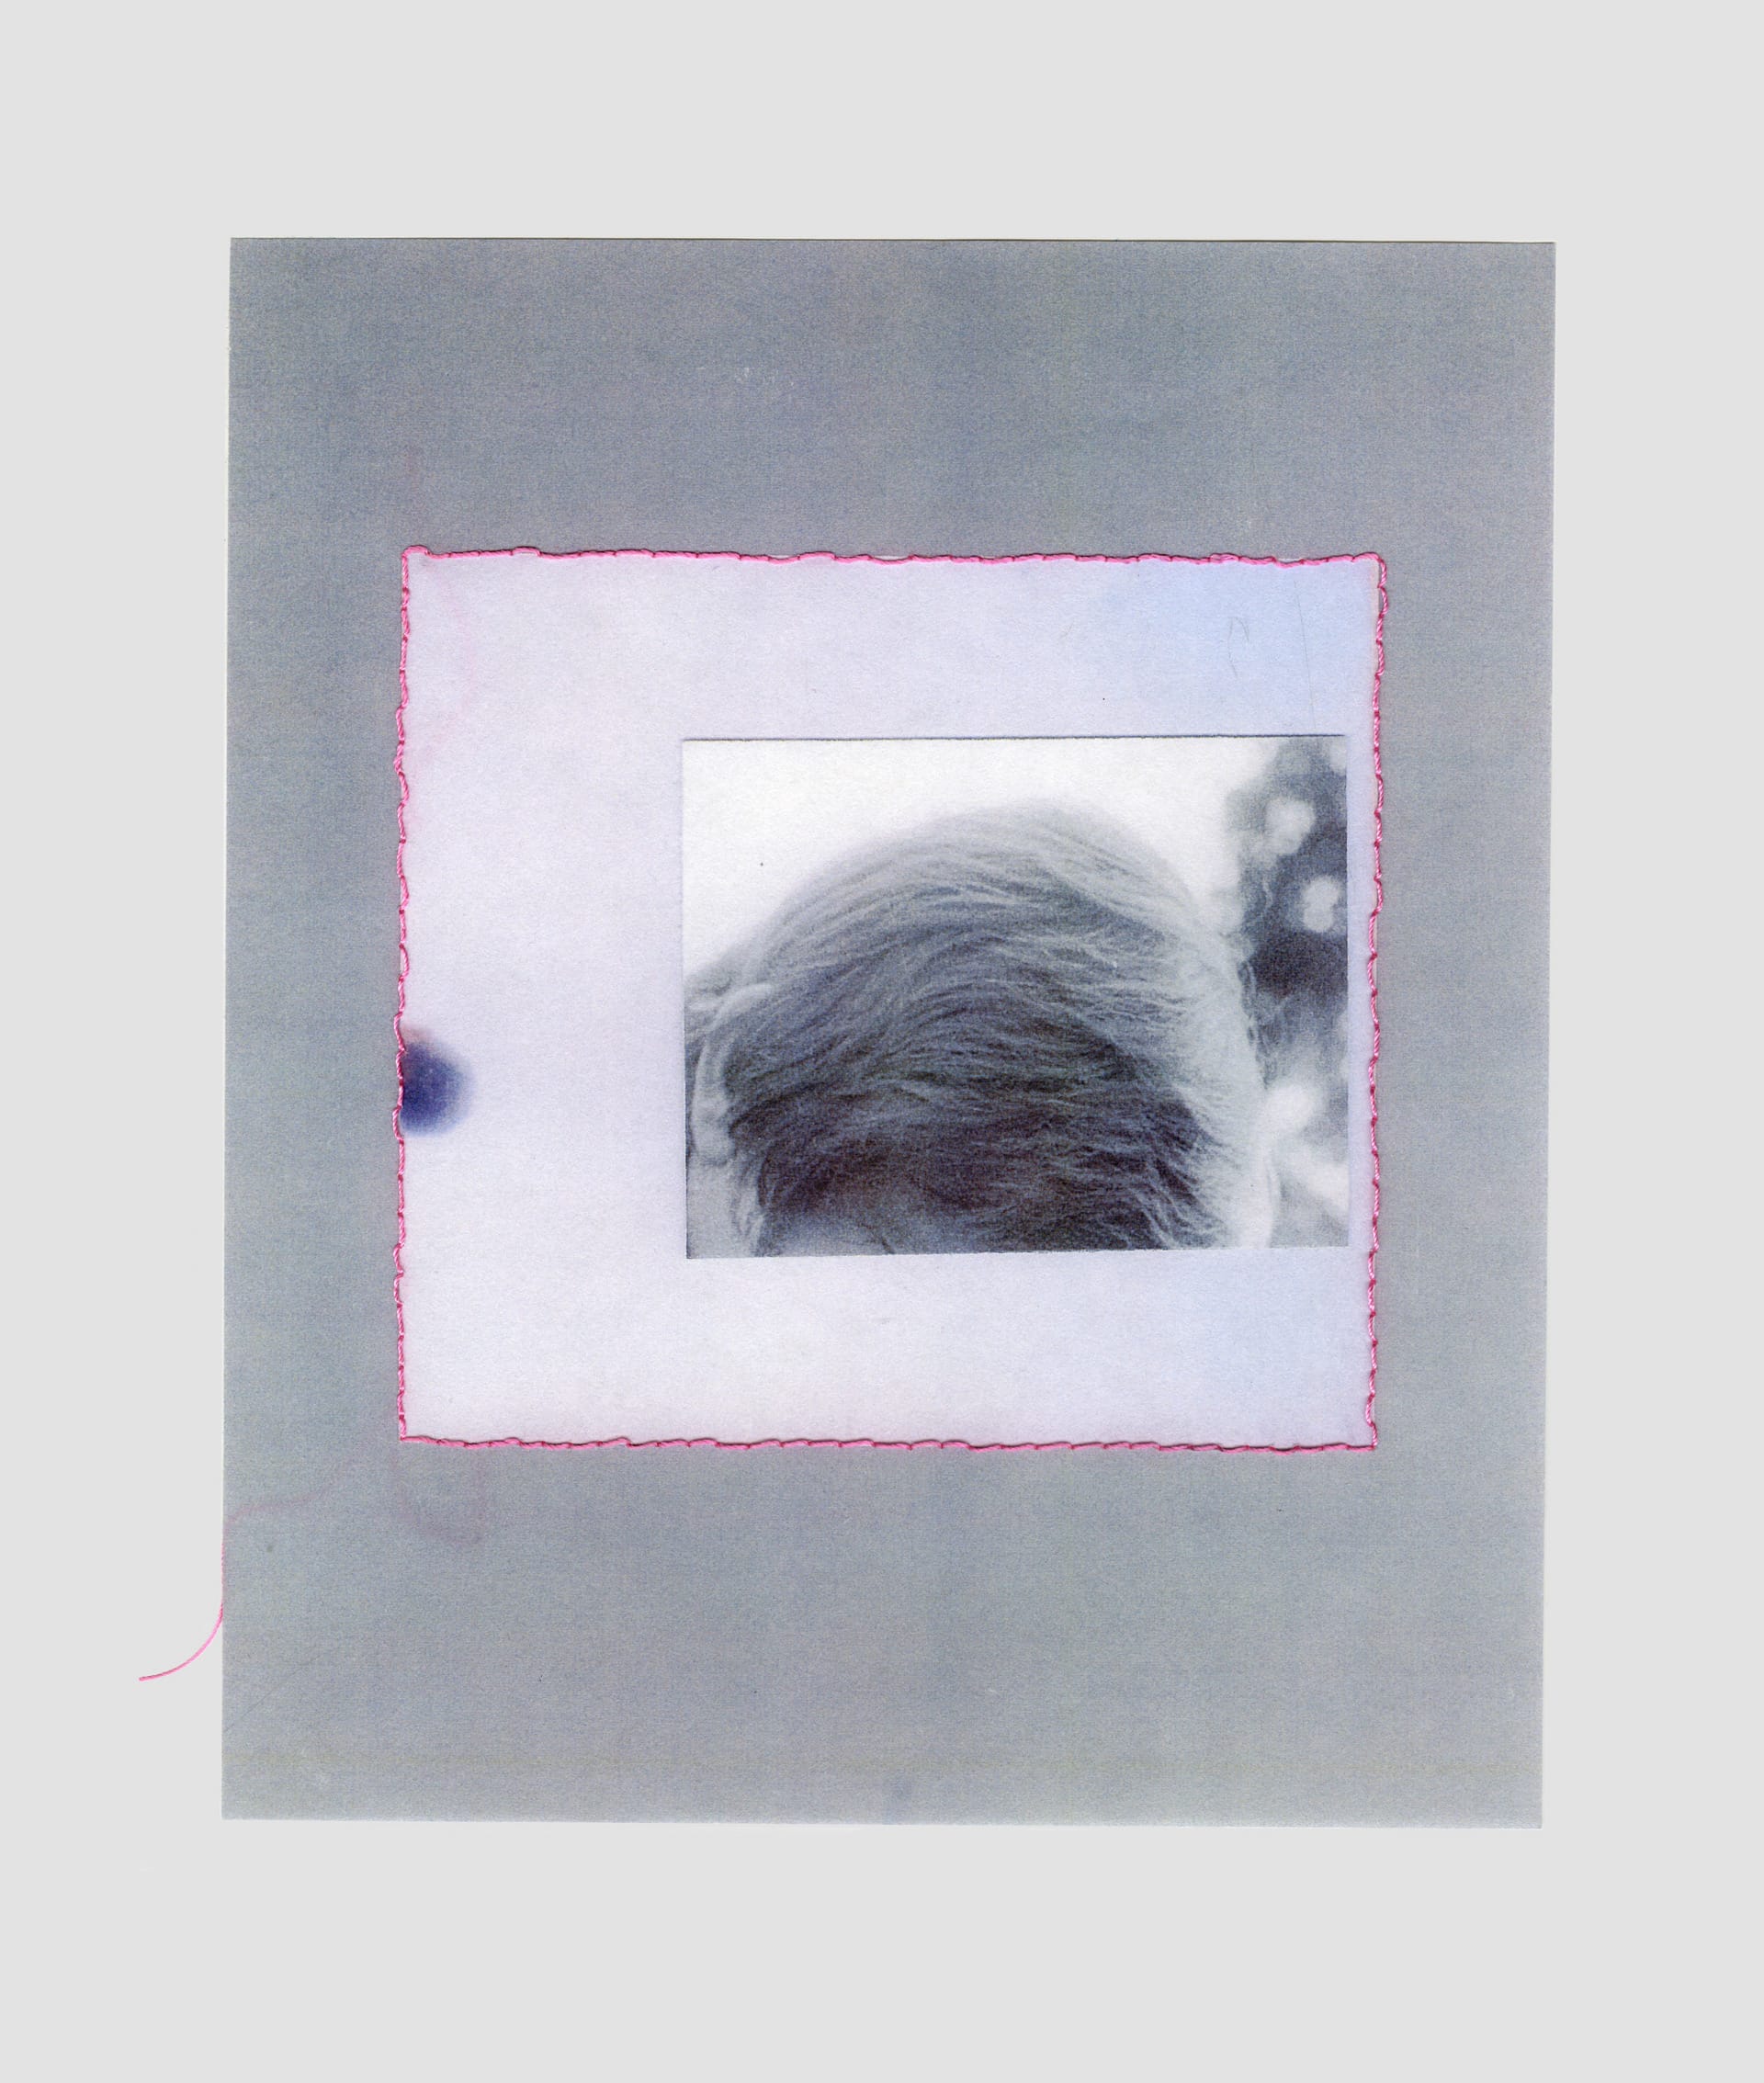 A collage with a greyscale photograph of the top of a man's head. The collage is outlined with a pink square of back stitch